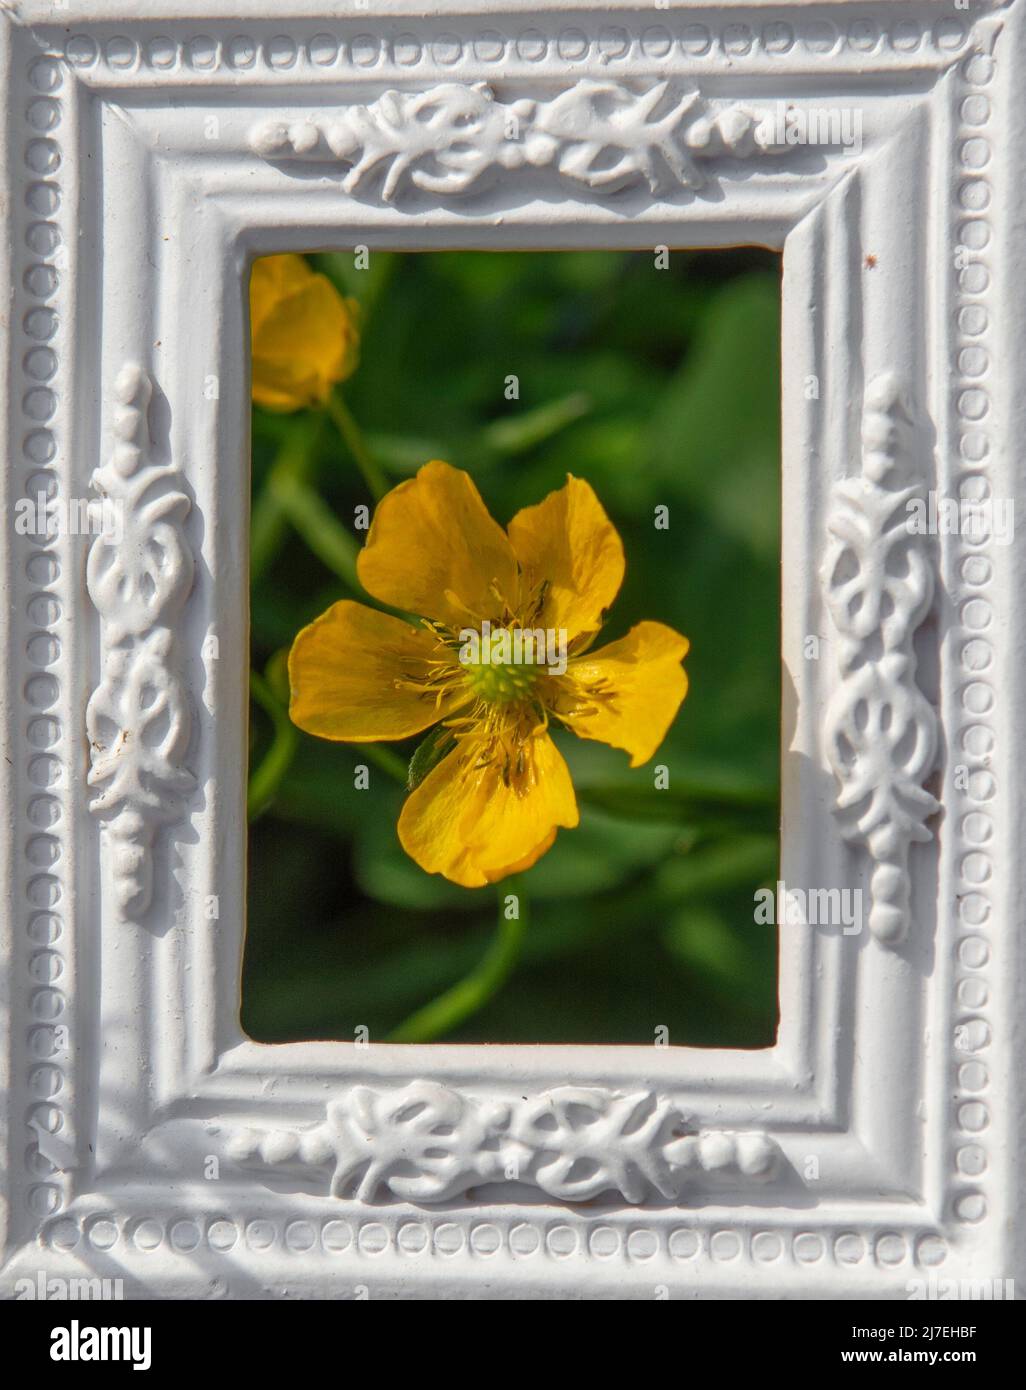 Blooming Yellow Marsh Marigold Flowers (Caltha palustris) in the white ornamental picture frame. Stock Photo